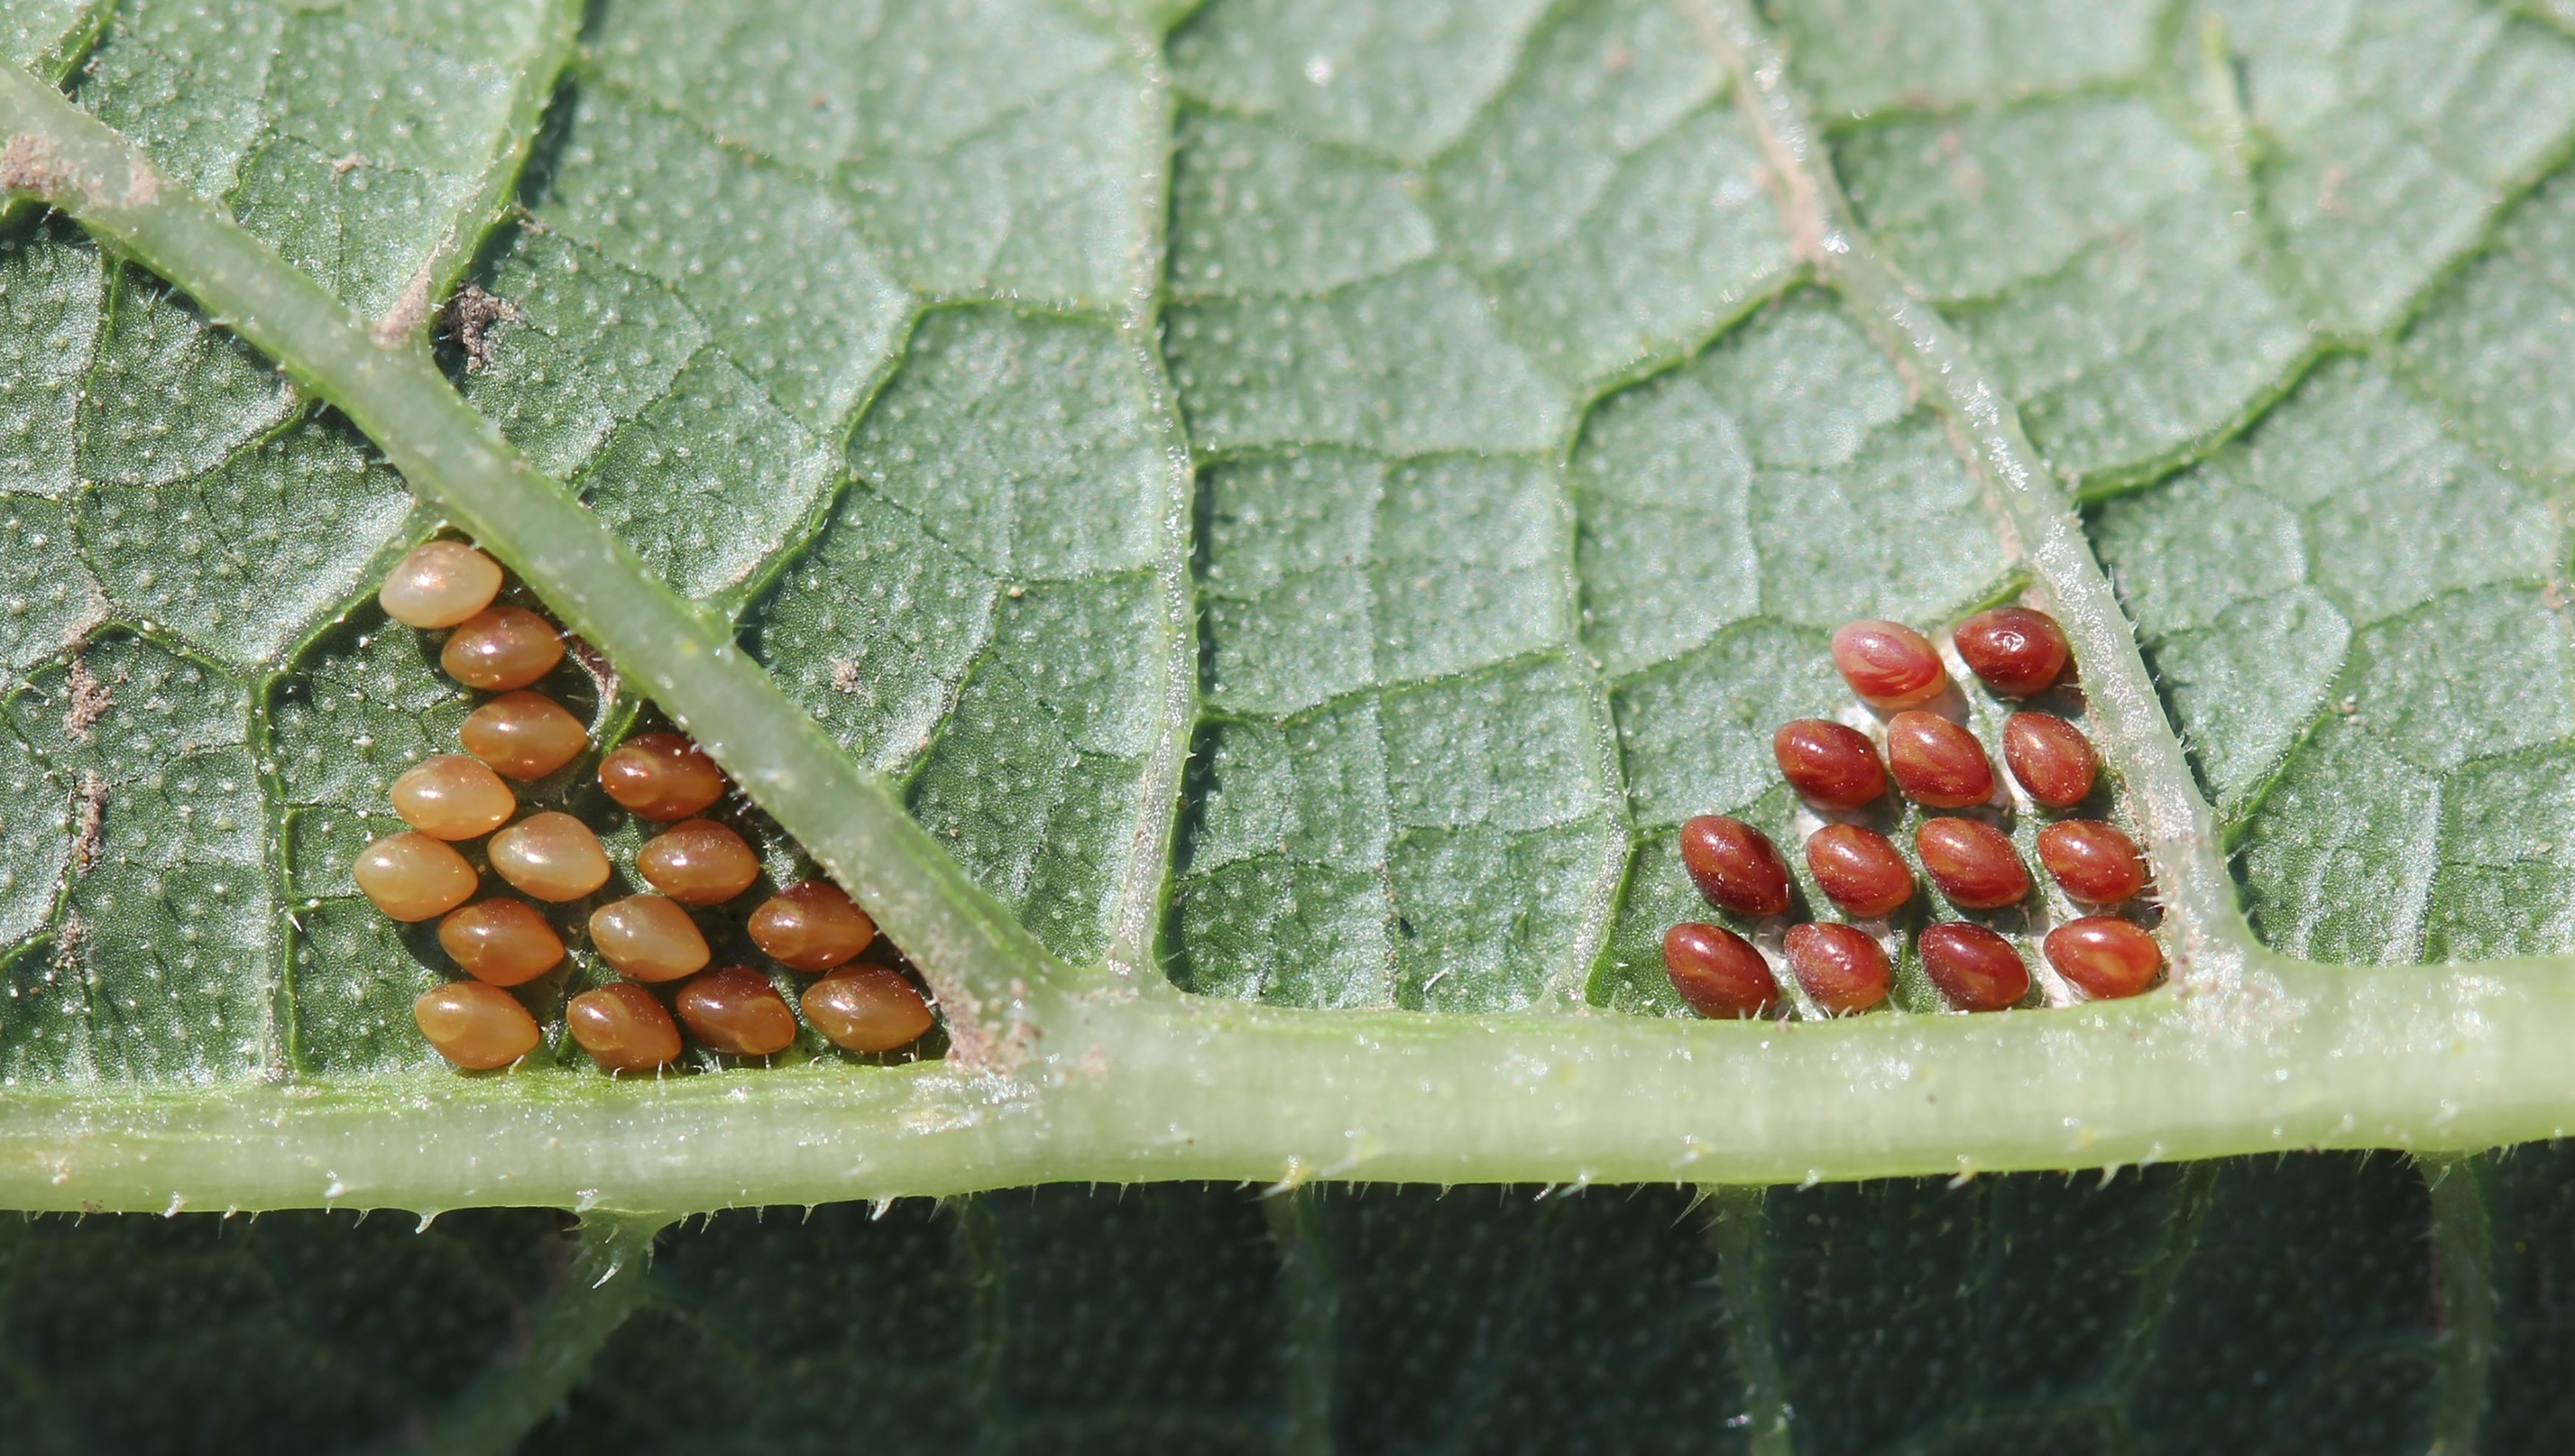 Two clusters of red spherical eggs on the underside of a green leaf.